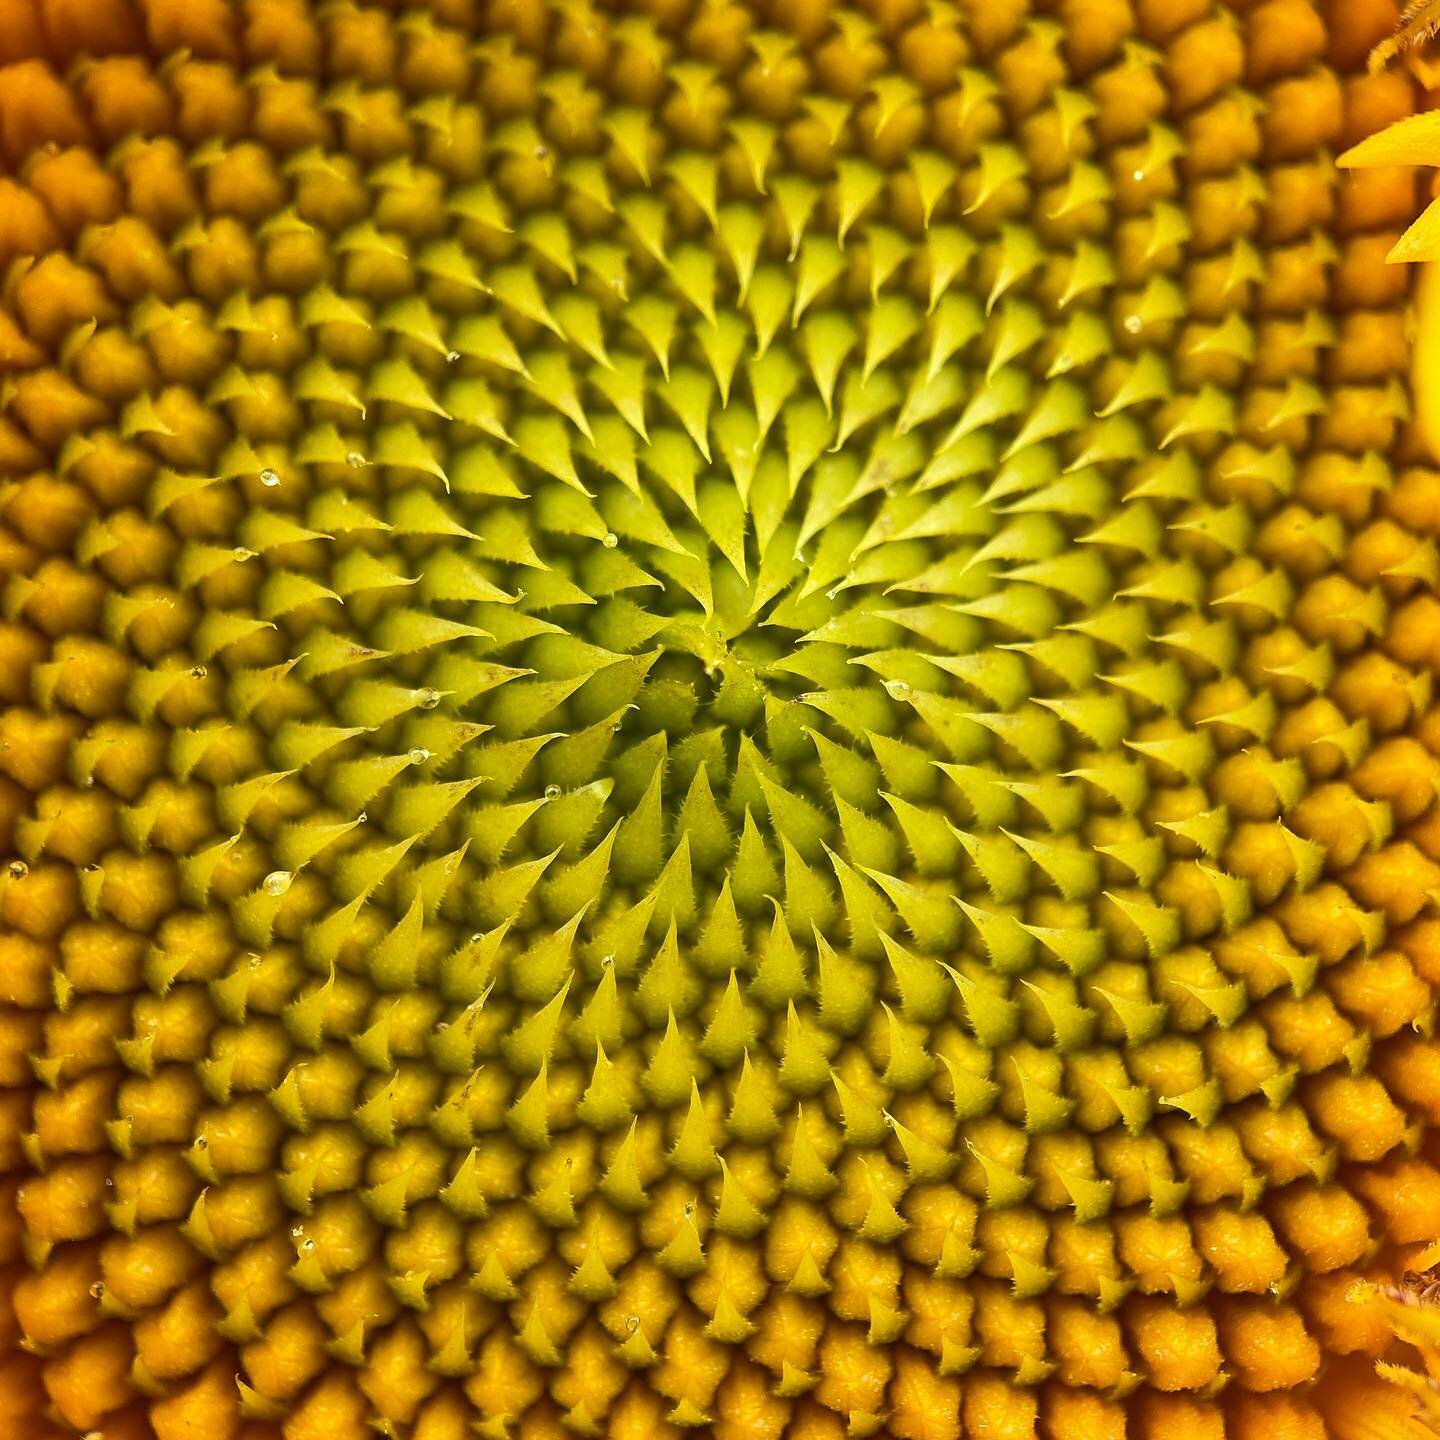 This is a macro lens shot of the center of a sunflower! Speaking of sunnies- we will be at market with fresh sunflower bundles + bouquets specifically for drying! Come see us at the @franklincountyfarmersmarket tomorrow 8/27 from 8:30 to 12!